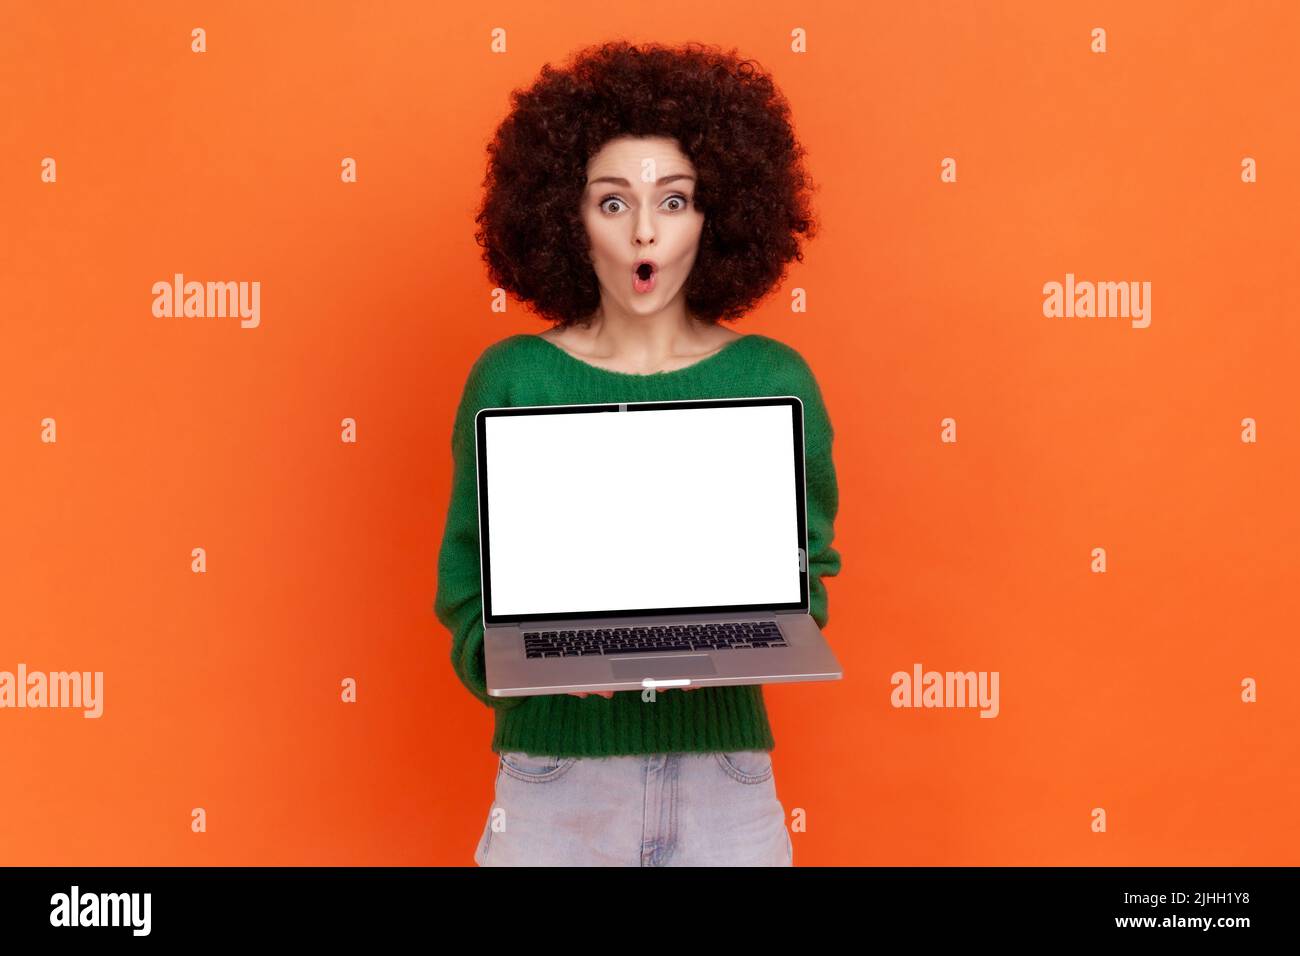 Astonished woman with Afro hairstyle wearing green casual style sweater holding laptop computer with empty screen, showing shocking advertisement. Indoor studio shot isolated on orange background. Stock Photo